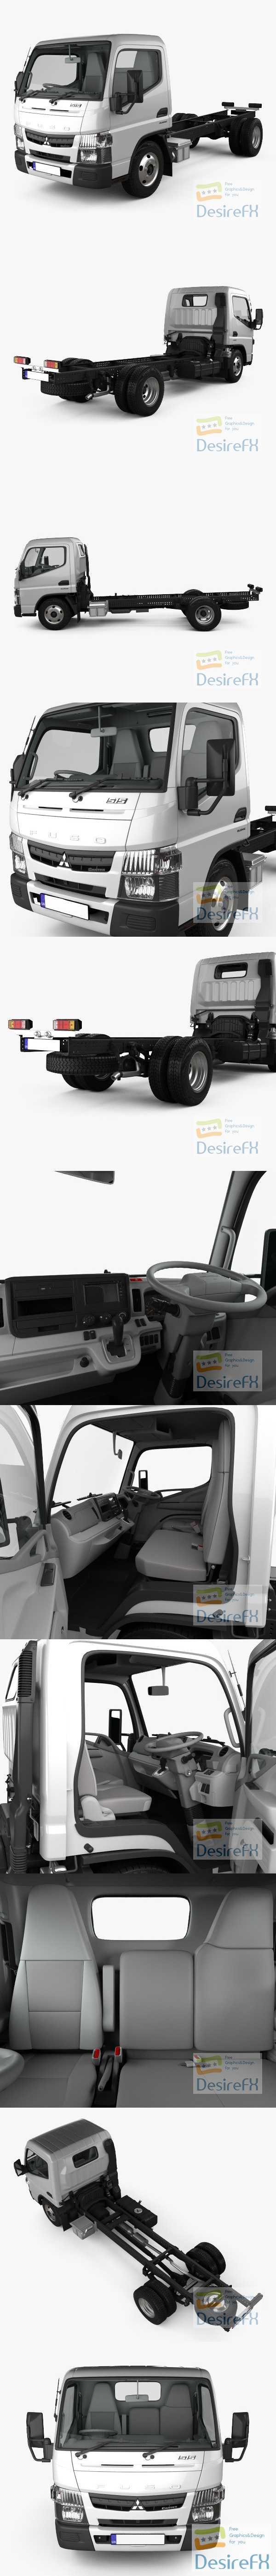 Mitsubishi Fuso Canter Super Low City Cab Chassis Truck with HQ interior 2019 3D Model